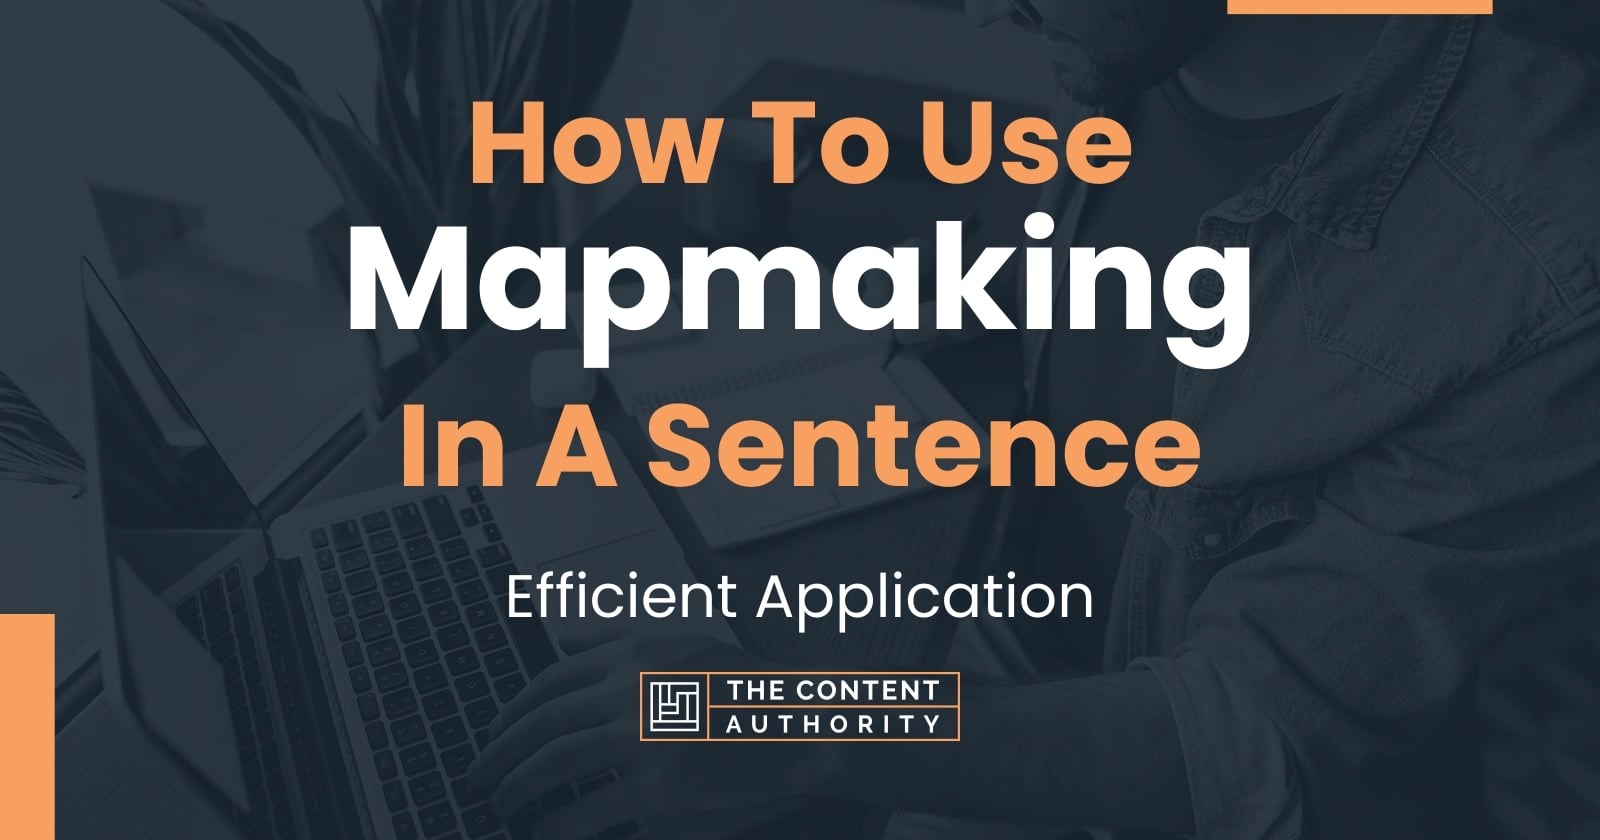 How To Use Mapmaking In A Sentence 